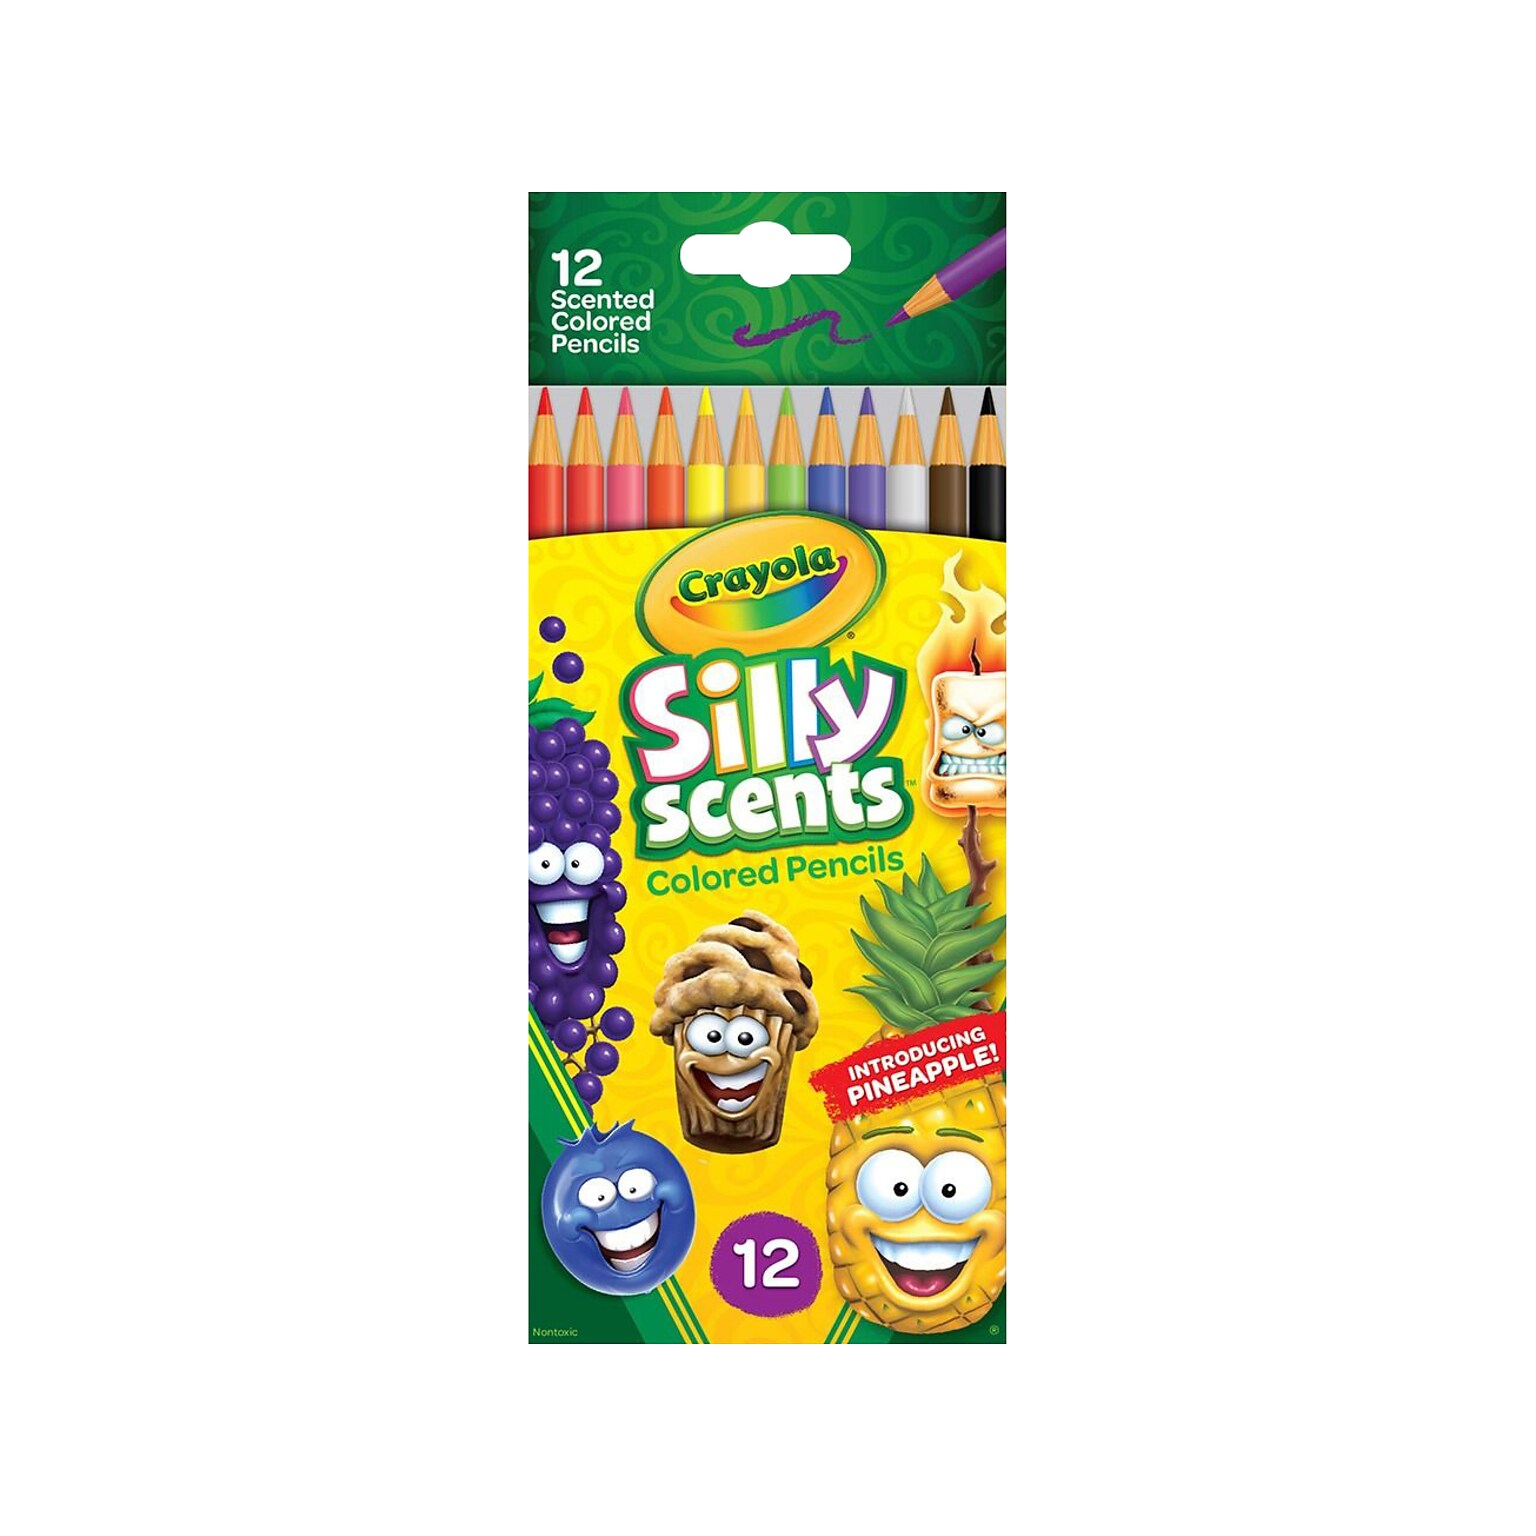 Crayola Silly Scents Colored Pencils, Assorted Colors, 12/Pack (68-2112)